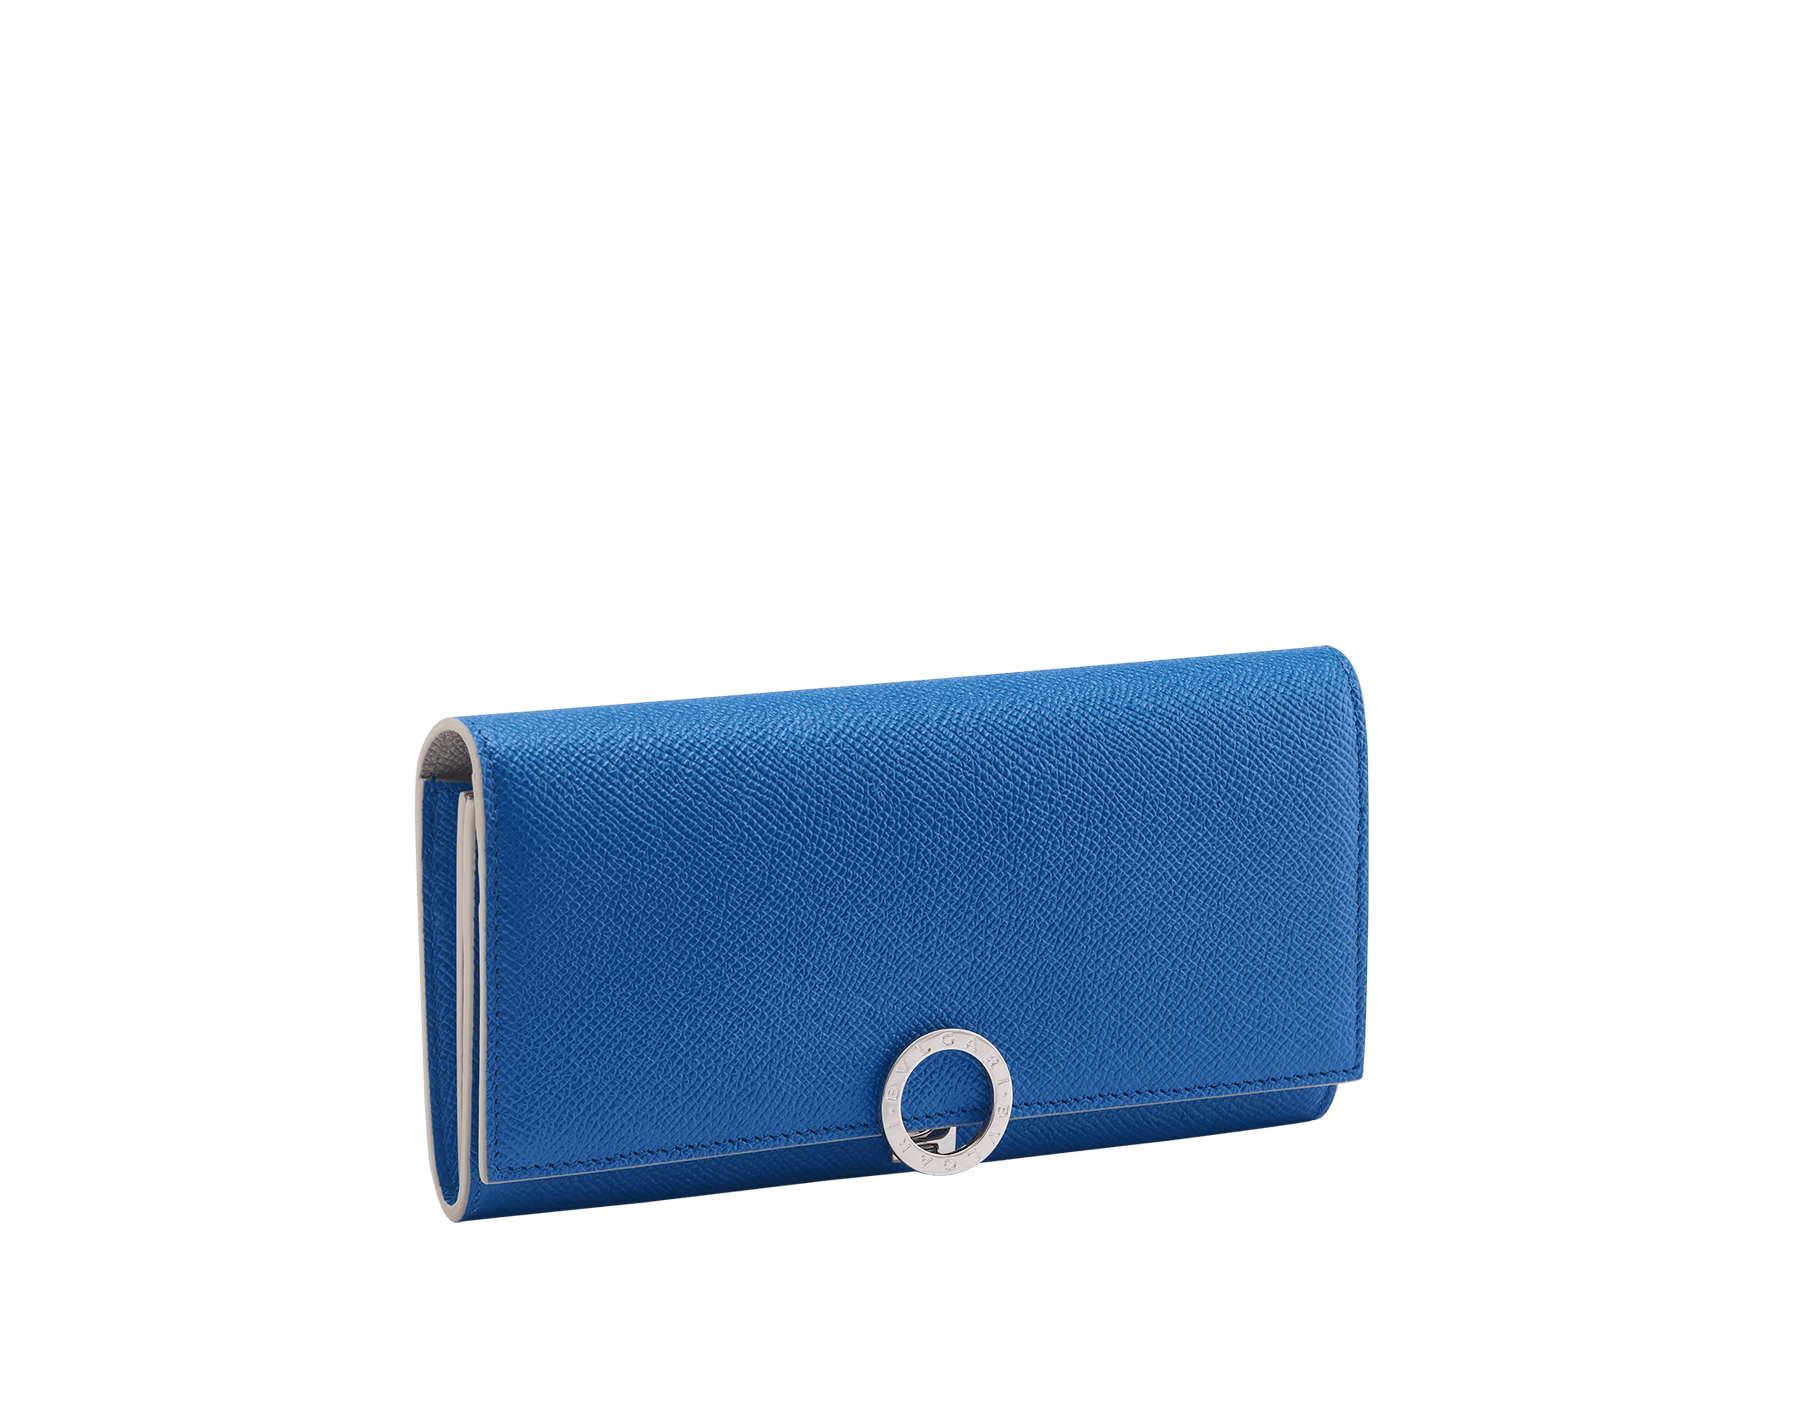 Bulgari Clip large wallet in Sahara amber light brown grained calf leather with denim sapphire blue grained calf leather interior. Iconic palladium-plated brass clip and folded closure. BCM-WLT-SLI-POC-Clb image 1